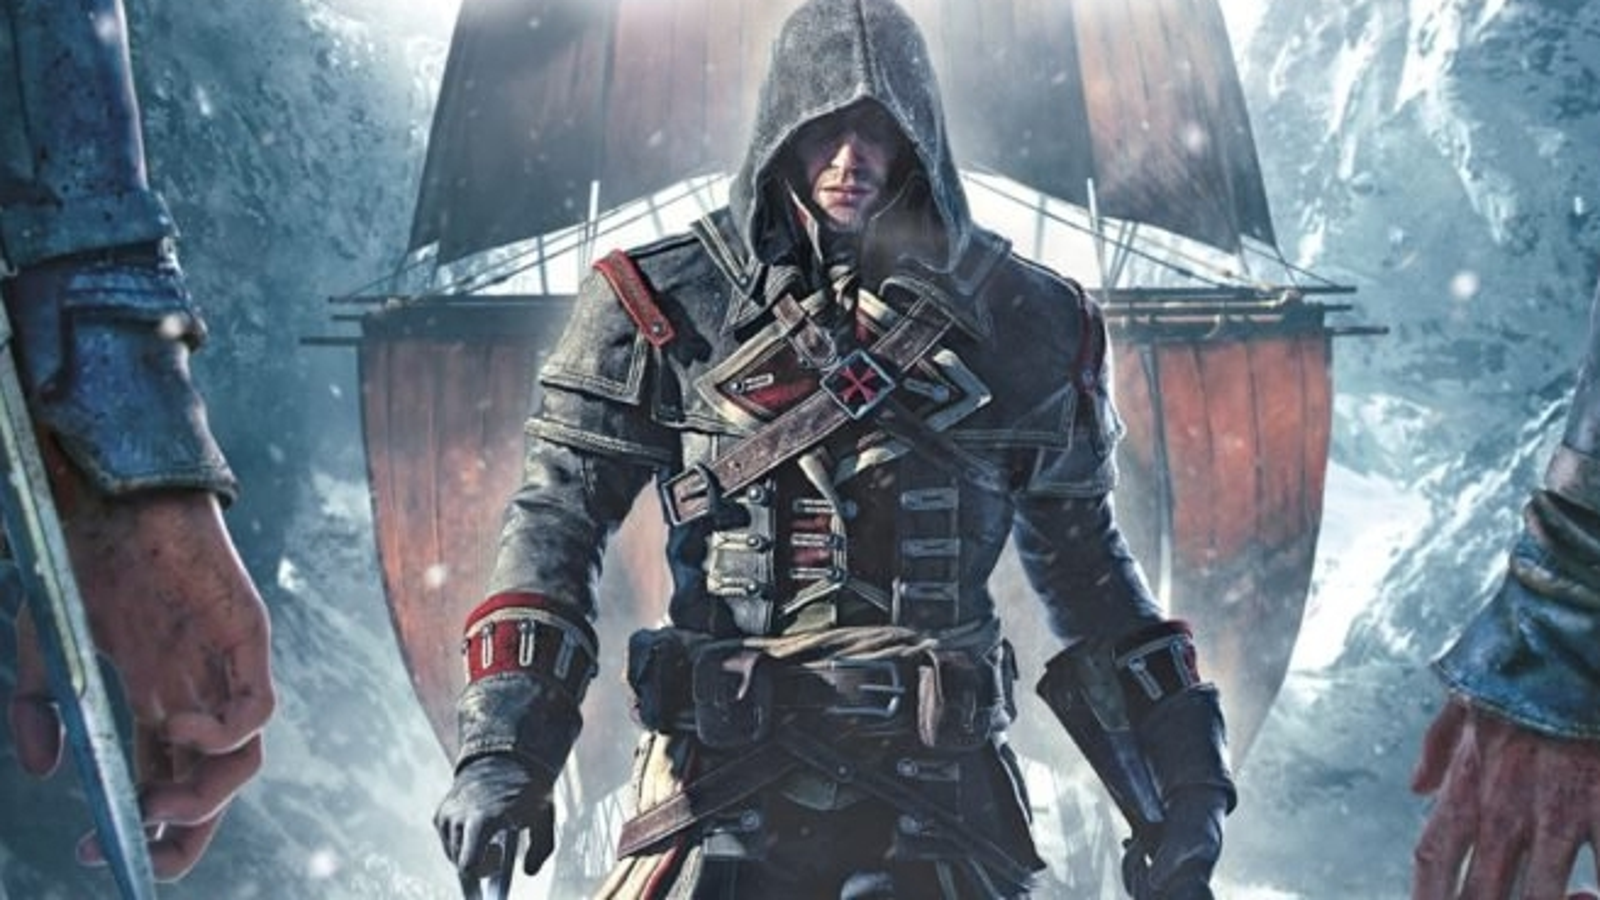 Steam Community :: Assassin's Creed Rogue